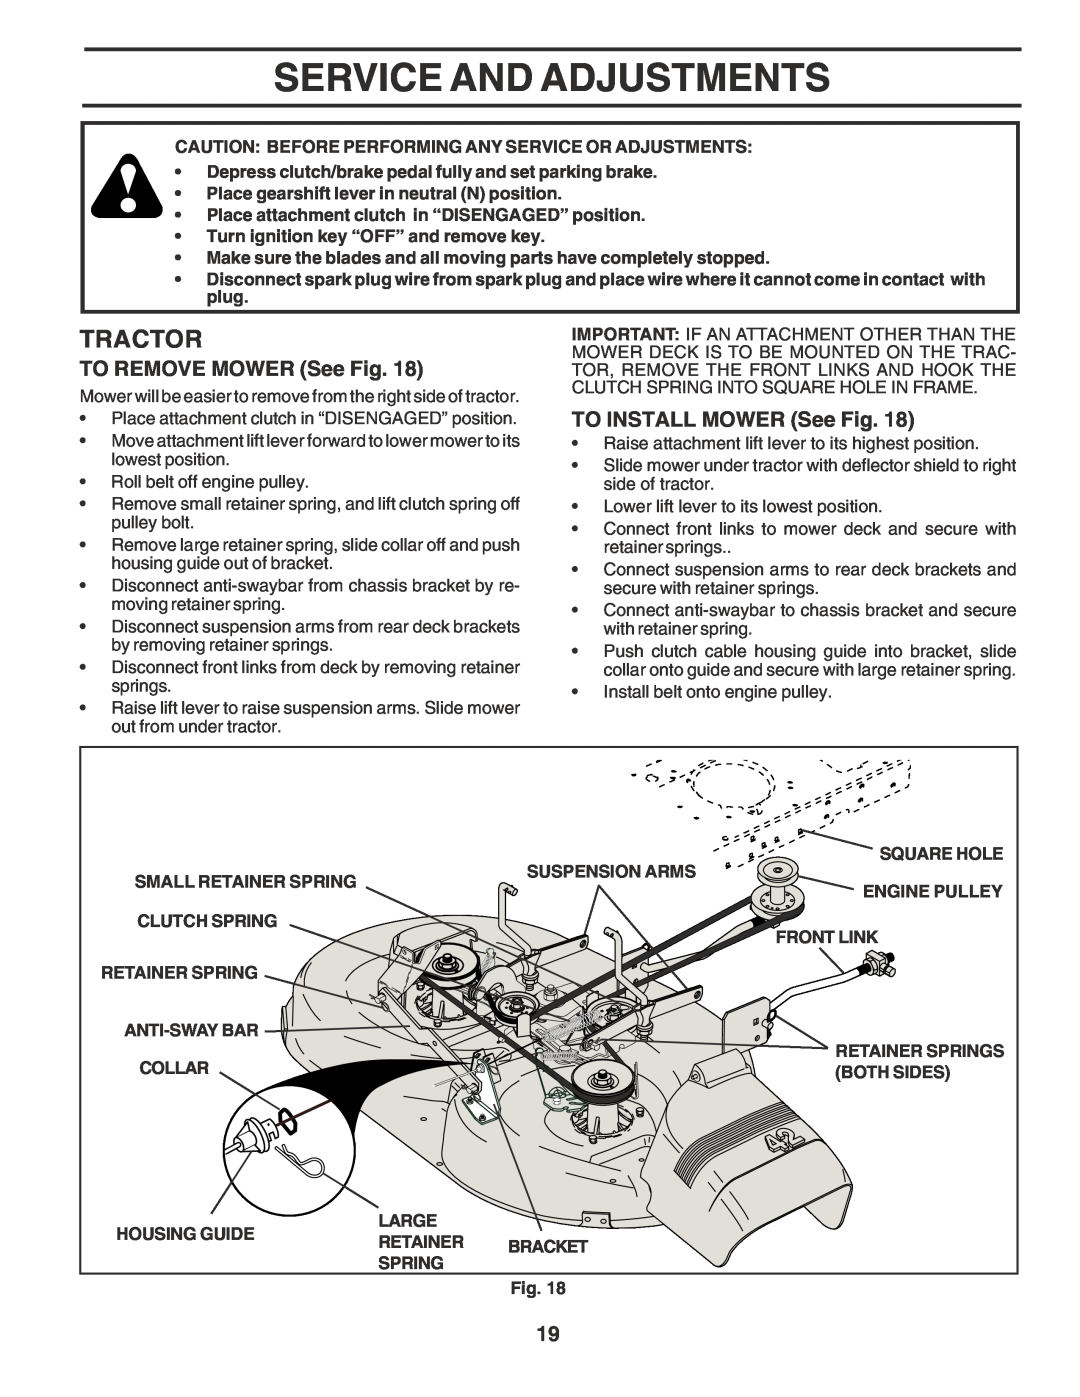 Poulan 181347 owner manual Service And Adjustments, TO REMOVE MOWER See Fig, TO INSTALL MOWER See Fig, Tractor 